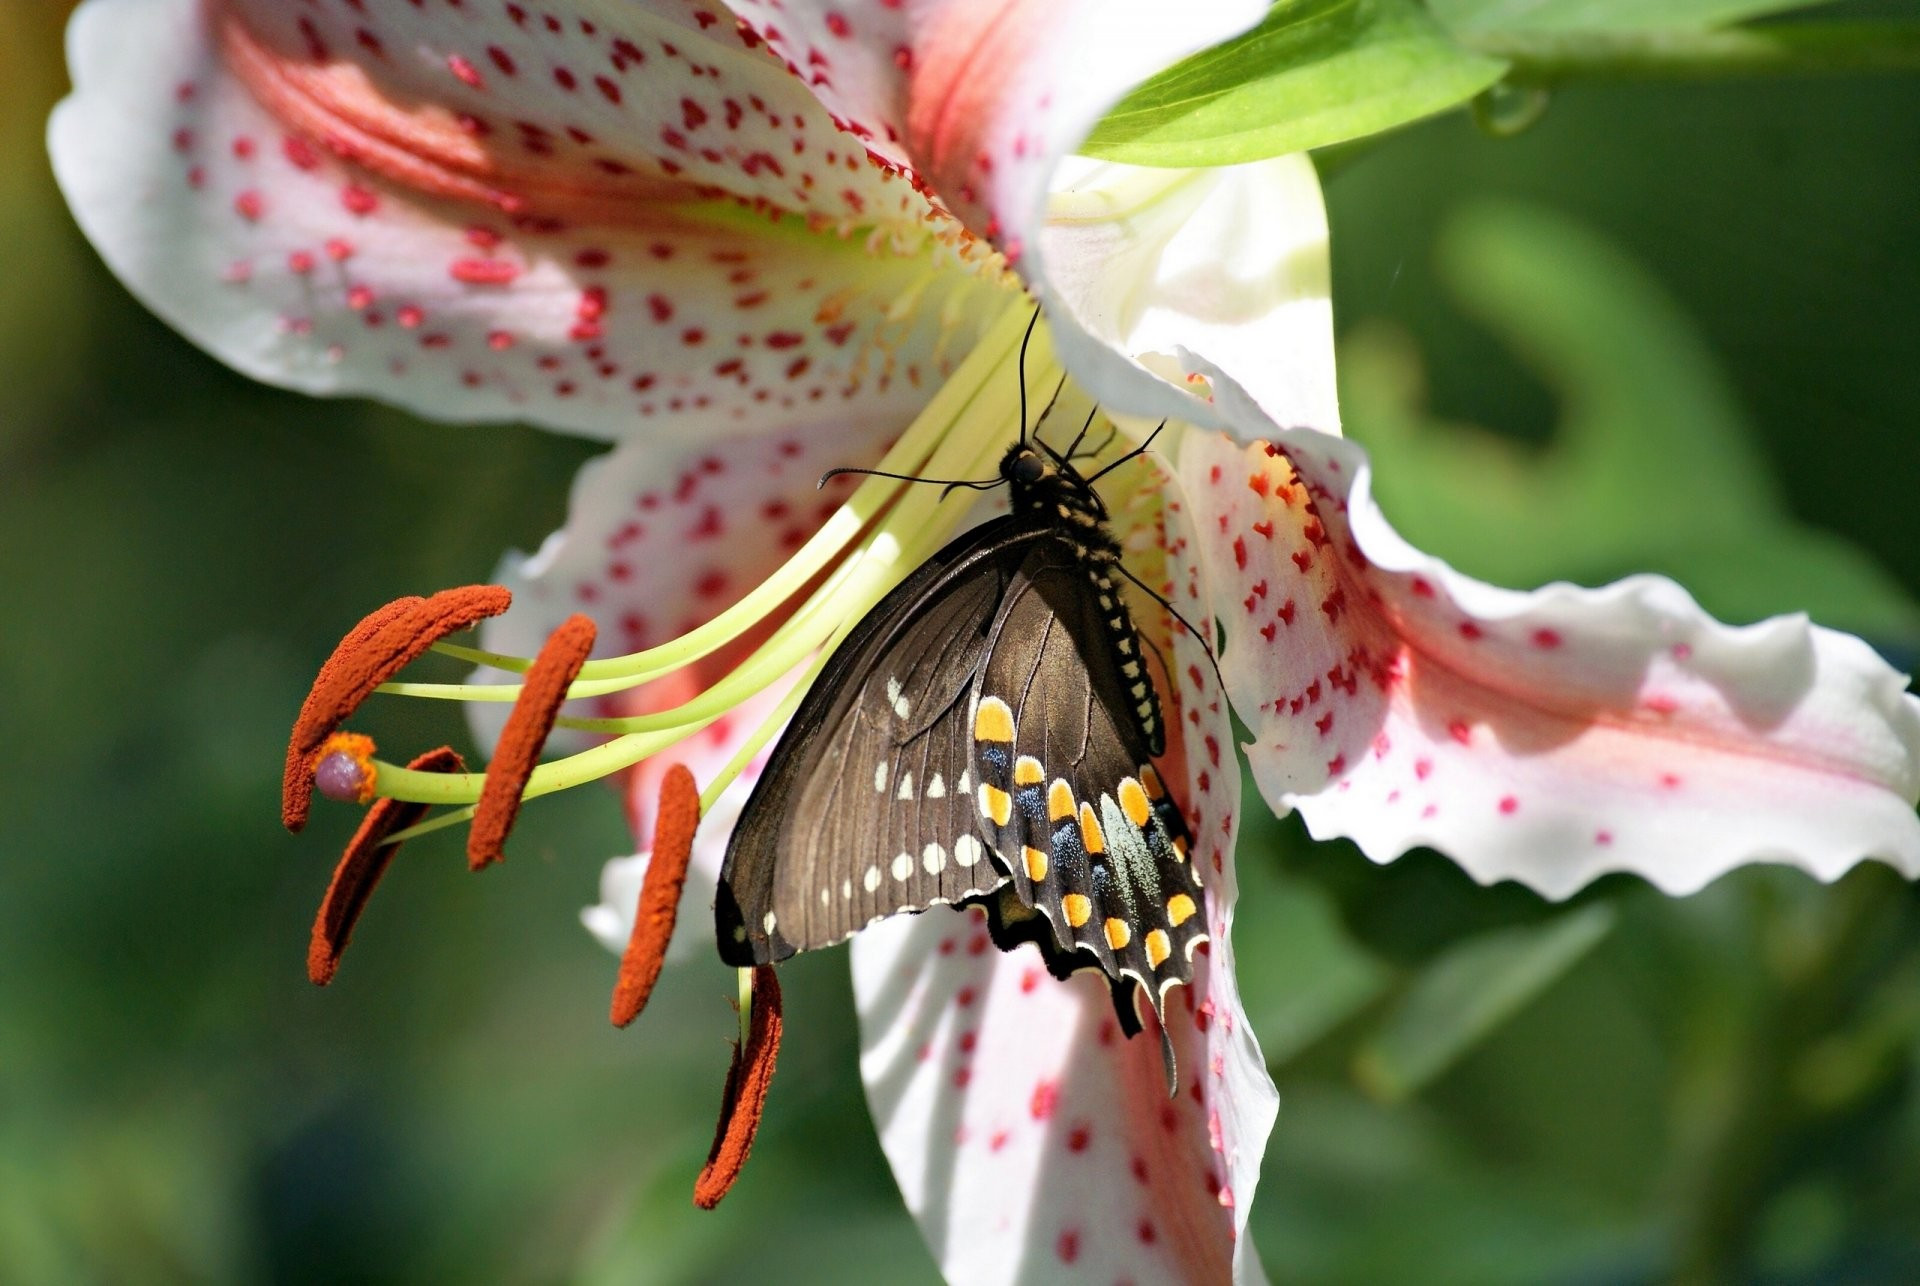 A butterfly with black wings collects nectar from a lily.